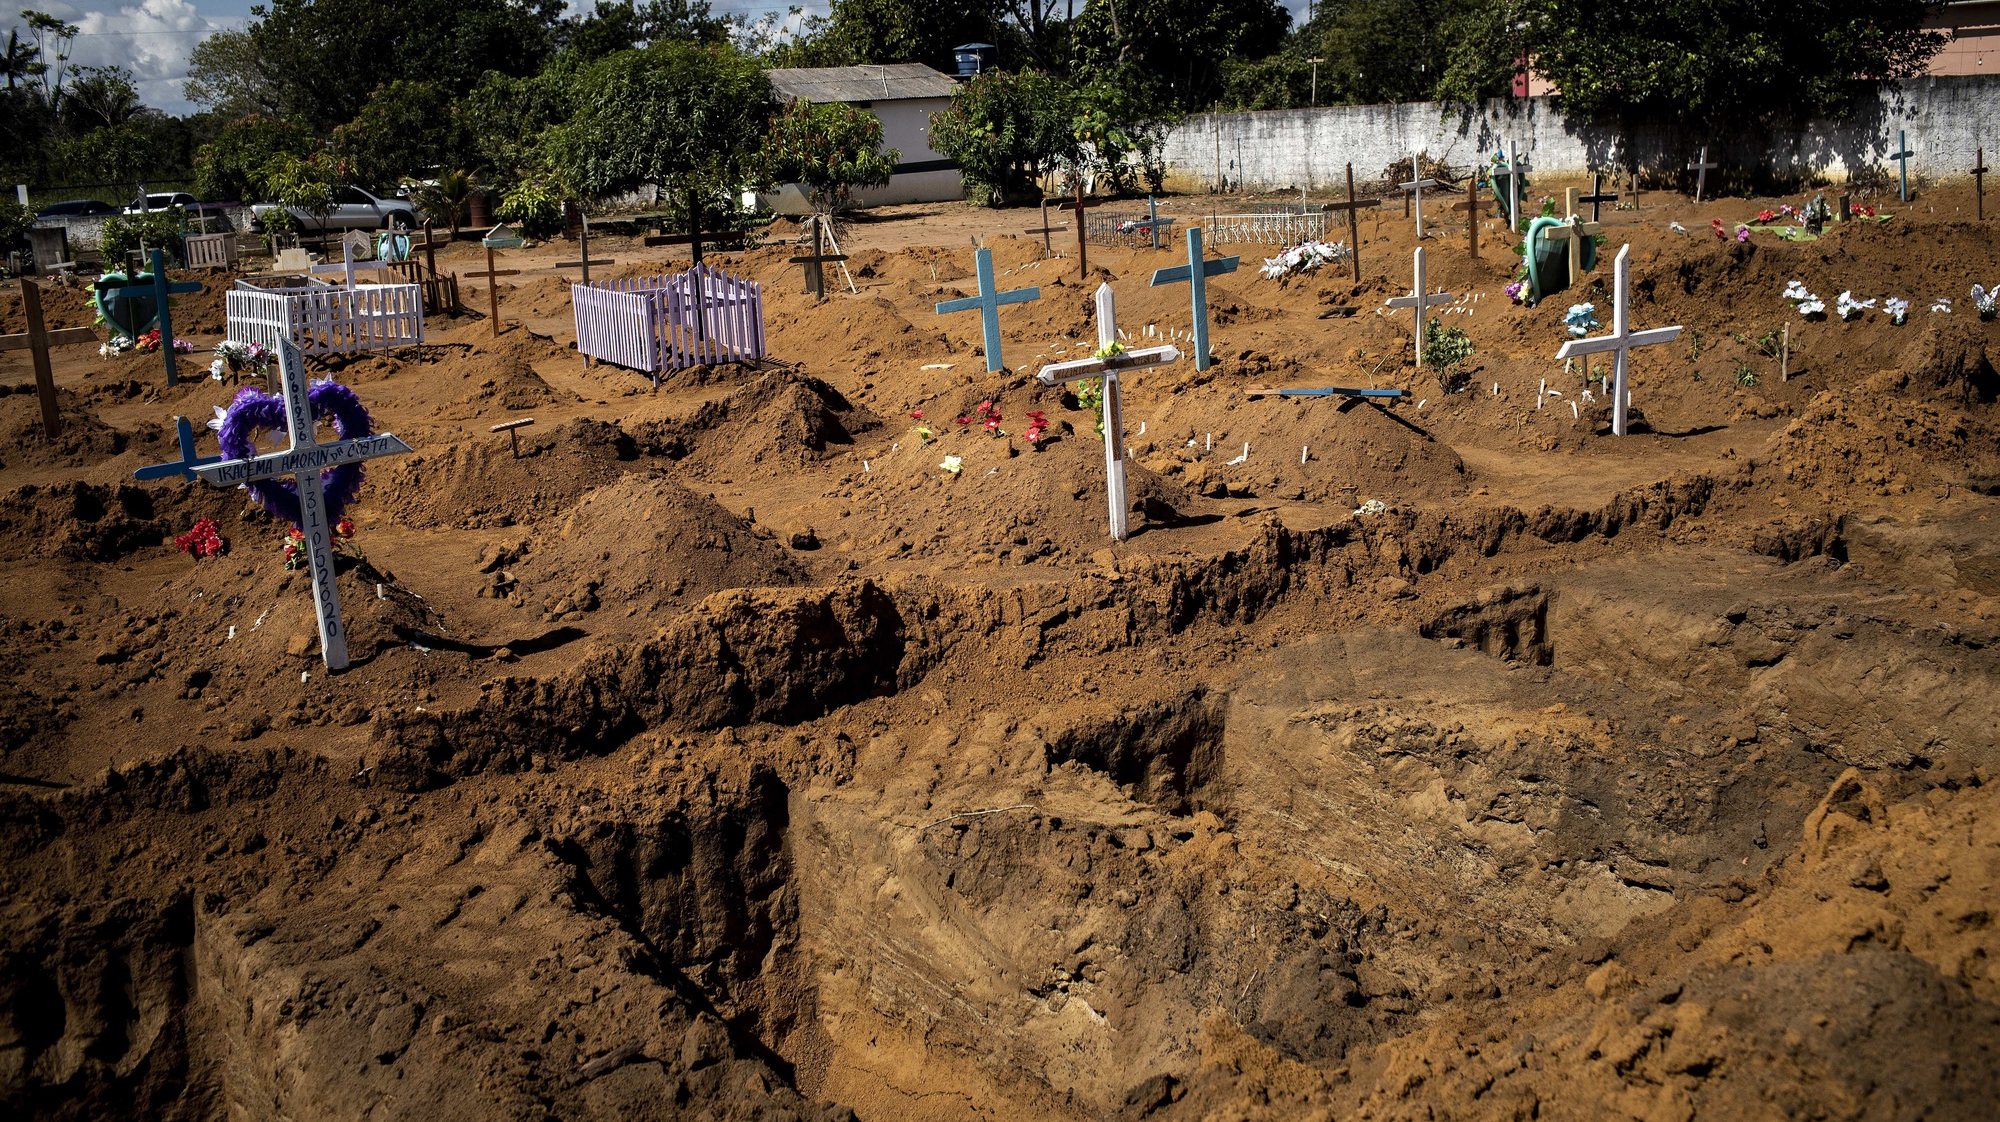 epa08477101 View of open graves in Campo da Saudade cemetery, in Manacapuru, Amazonas, Brazil, 08 June 2020 (Issued 10 June 2020). The residents of Manacapuru still mourn the death of one of the few doctors who worked in this city in the Brazilian Amazon. He died of coronavirus. The last blow to this remote town that has one of the highest death rates from COVID-19 in all of Brazil. Manacapuru, in the interior of the state of Amazonas (north), has lived through hell in the heart of the jungle. The pandemic has entered with unusual virulence in this territory bathed by the waters of the largest river on the planet.  EPA/RAPHAEL ALVES  ATTENTION: This Image is part of a PHOTO SET